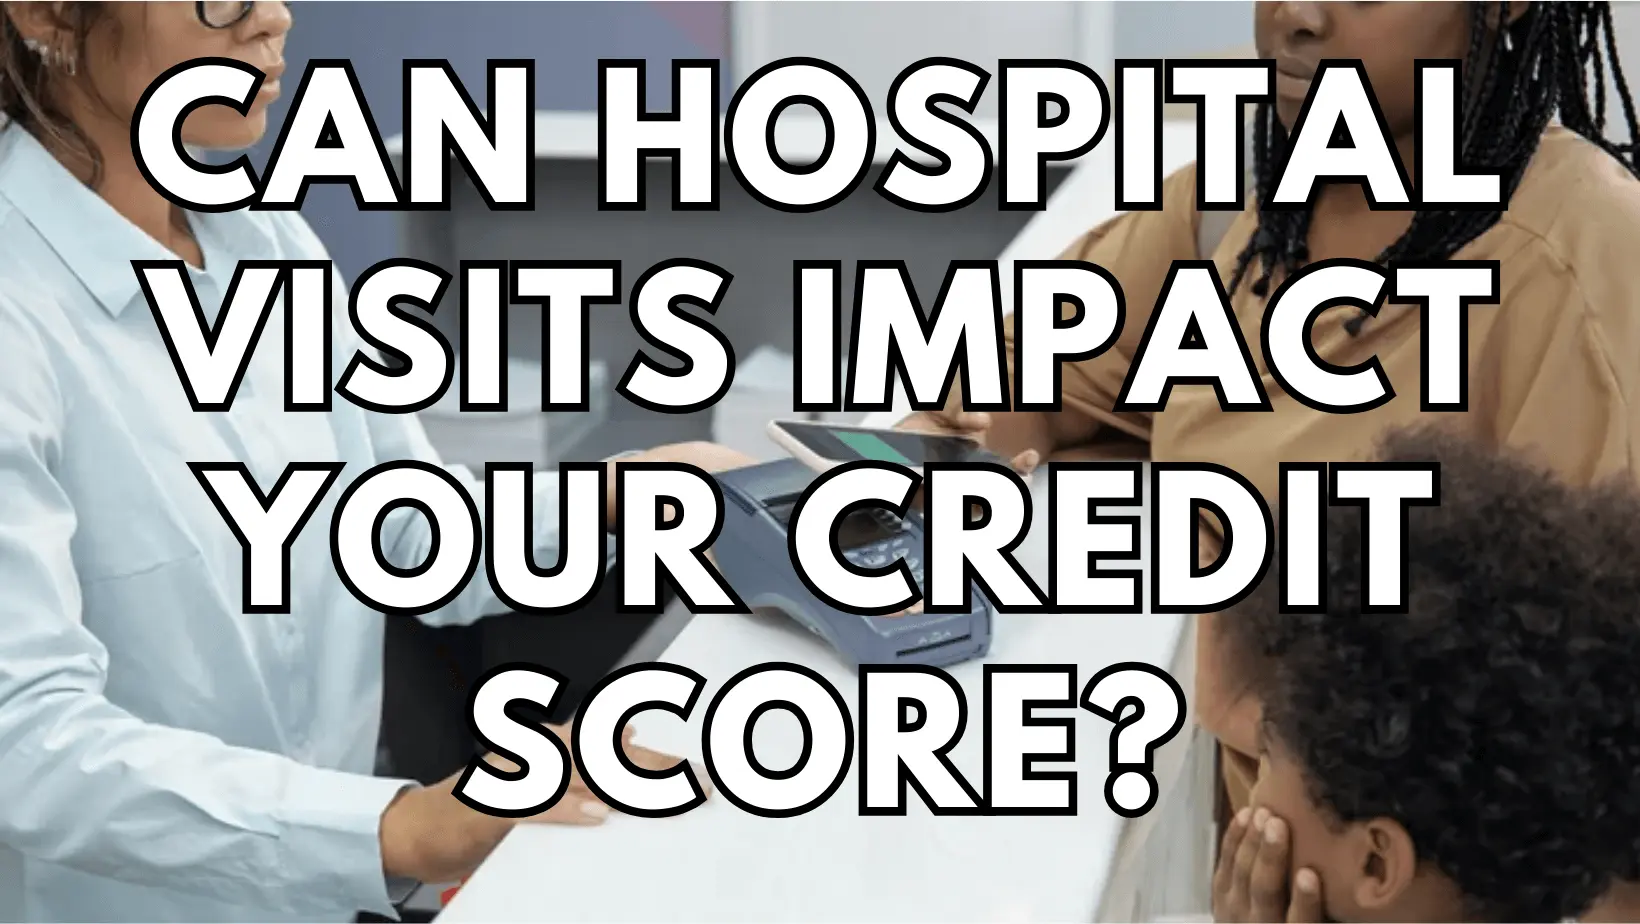 Can Hospital Visits Impact Your Credit Score